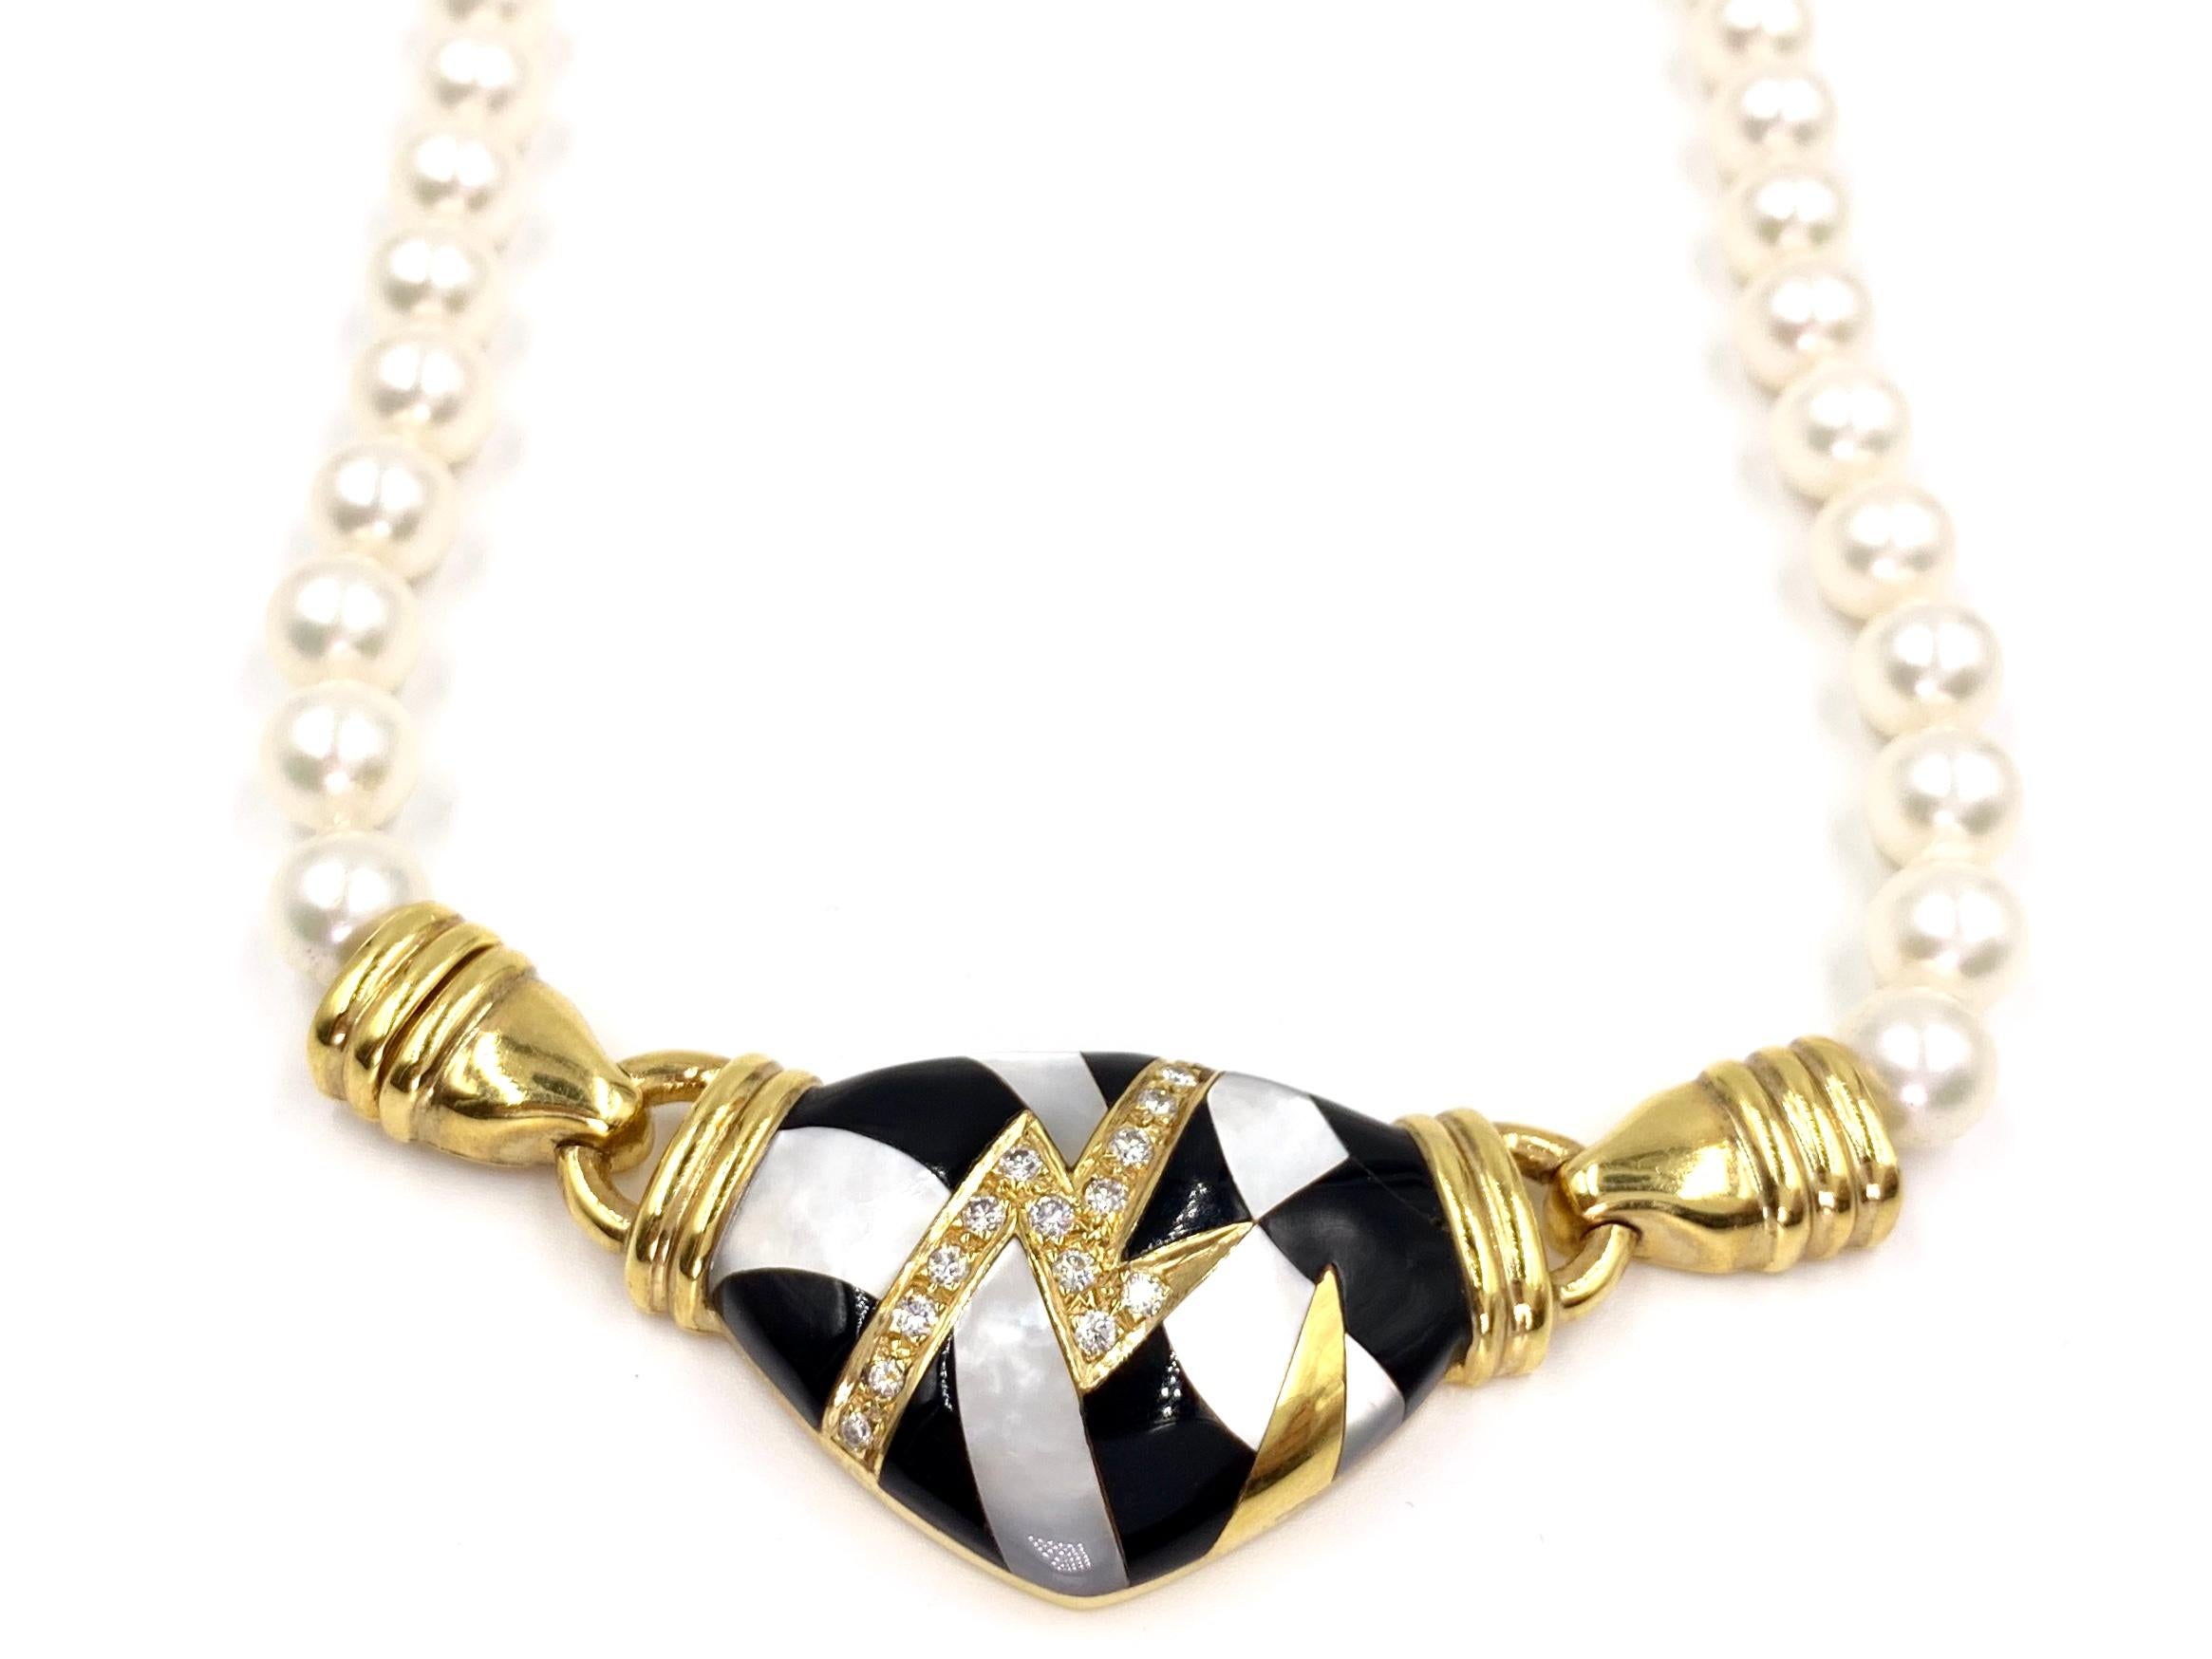 Created by Asch Grossbardt, a strand of beautiful white cultured pearls are fixed with an 18 karat yellow gold modern designed center pendant adorned with white diamonds, white mother of pearl and black onyx inlay. 15 round diamonds have a total